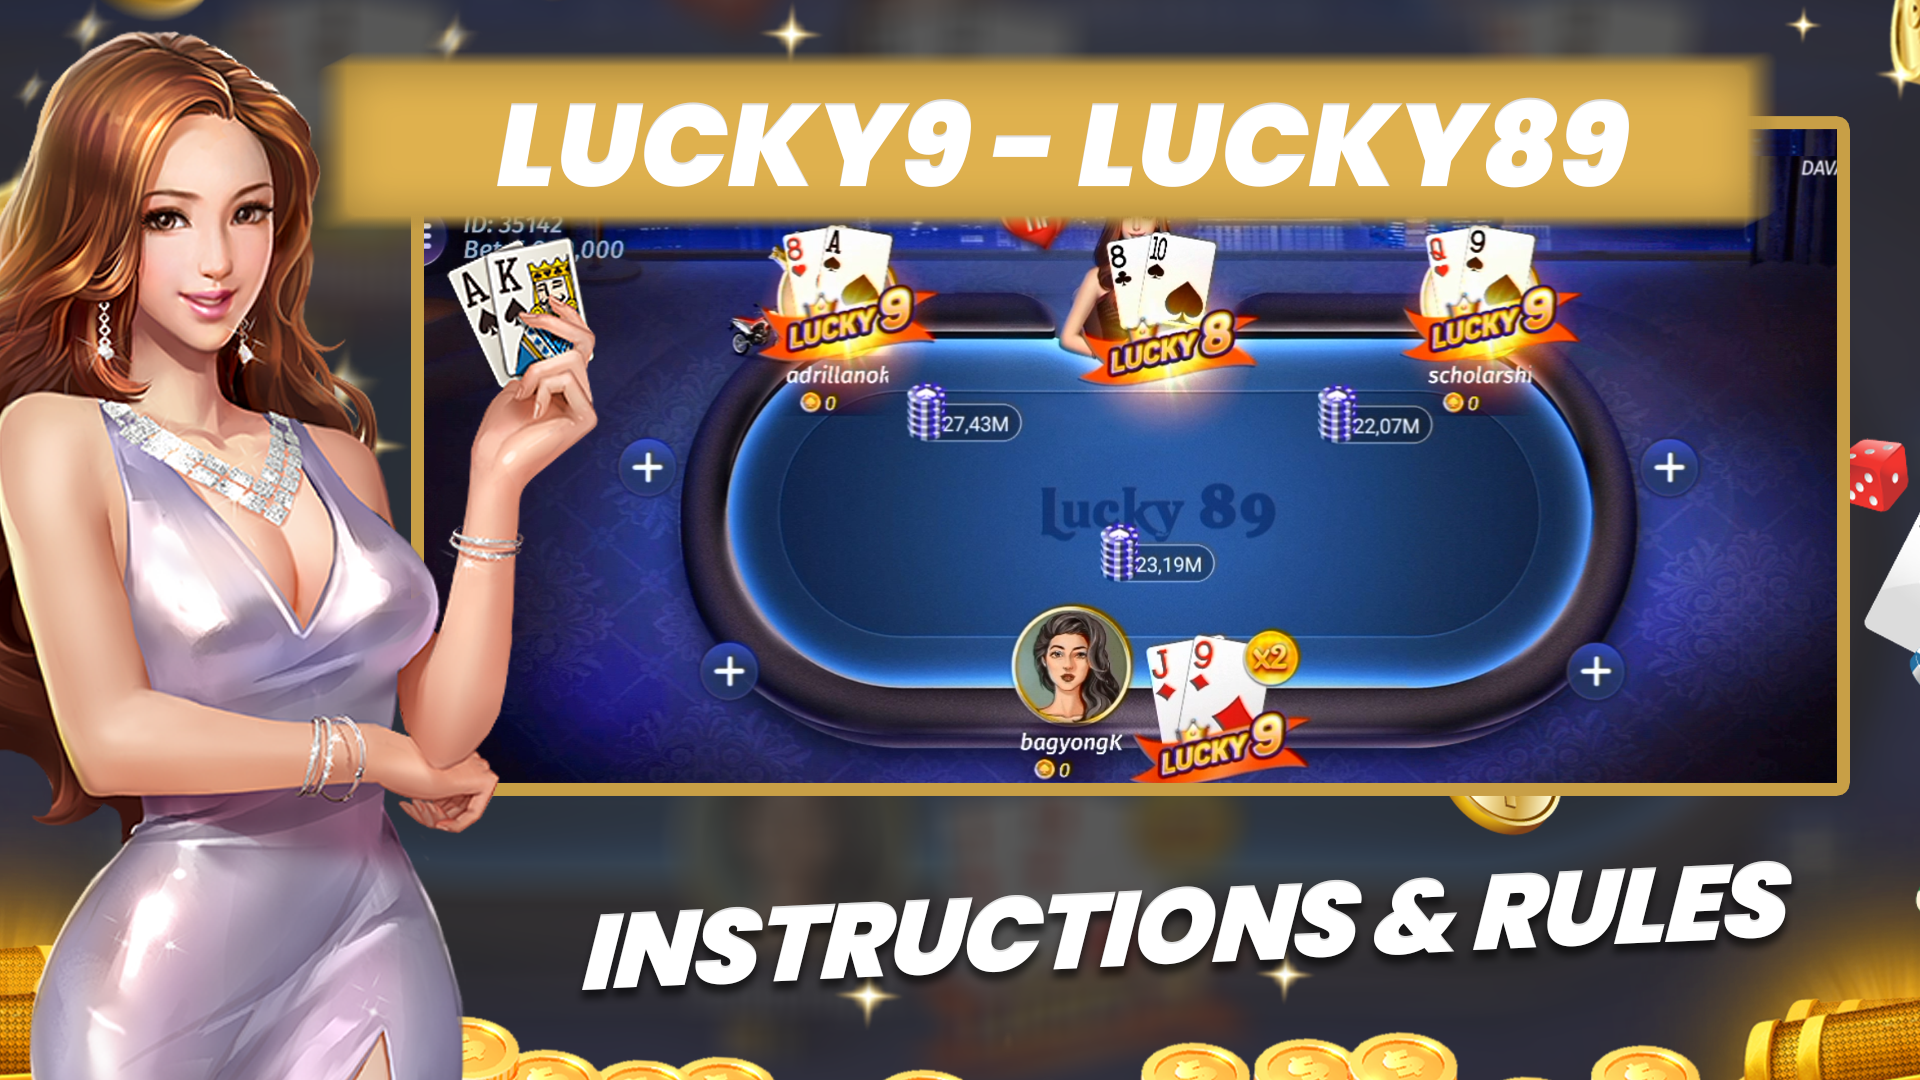 LUCKY9 – 89, let luckiness guide your way to big rewards